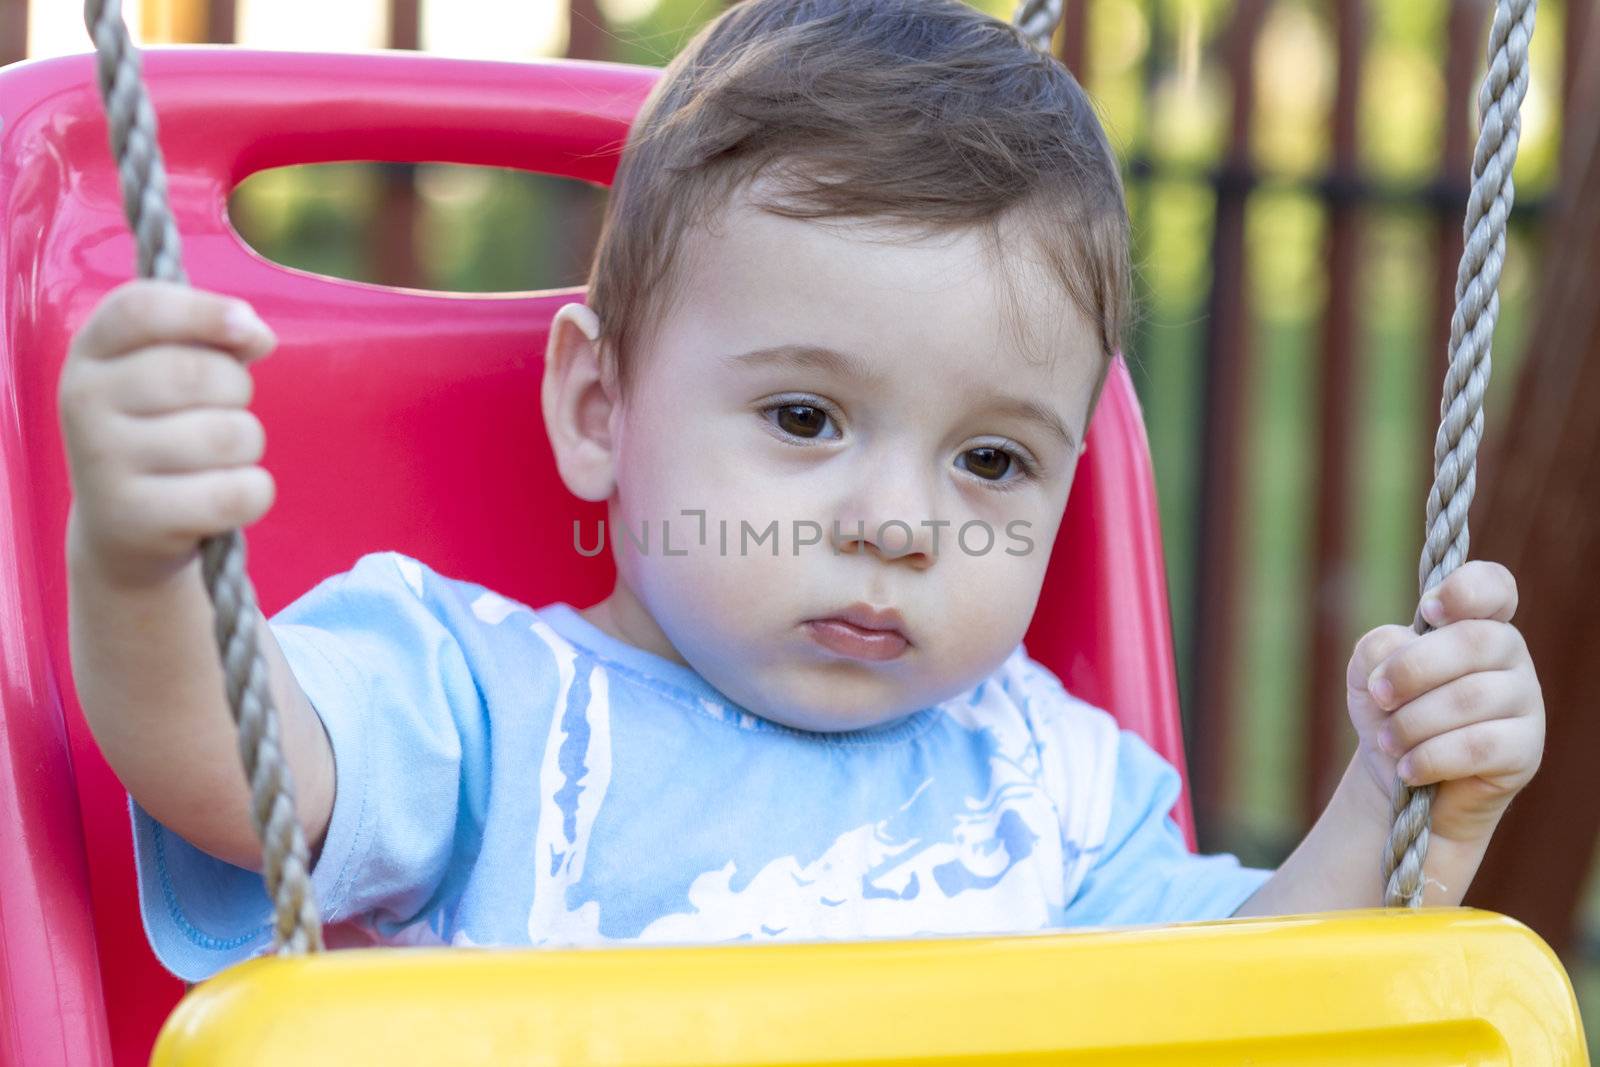 close-up of 9-month old baby boy  in a swing outdoors